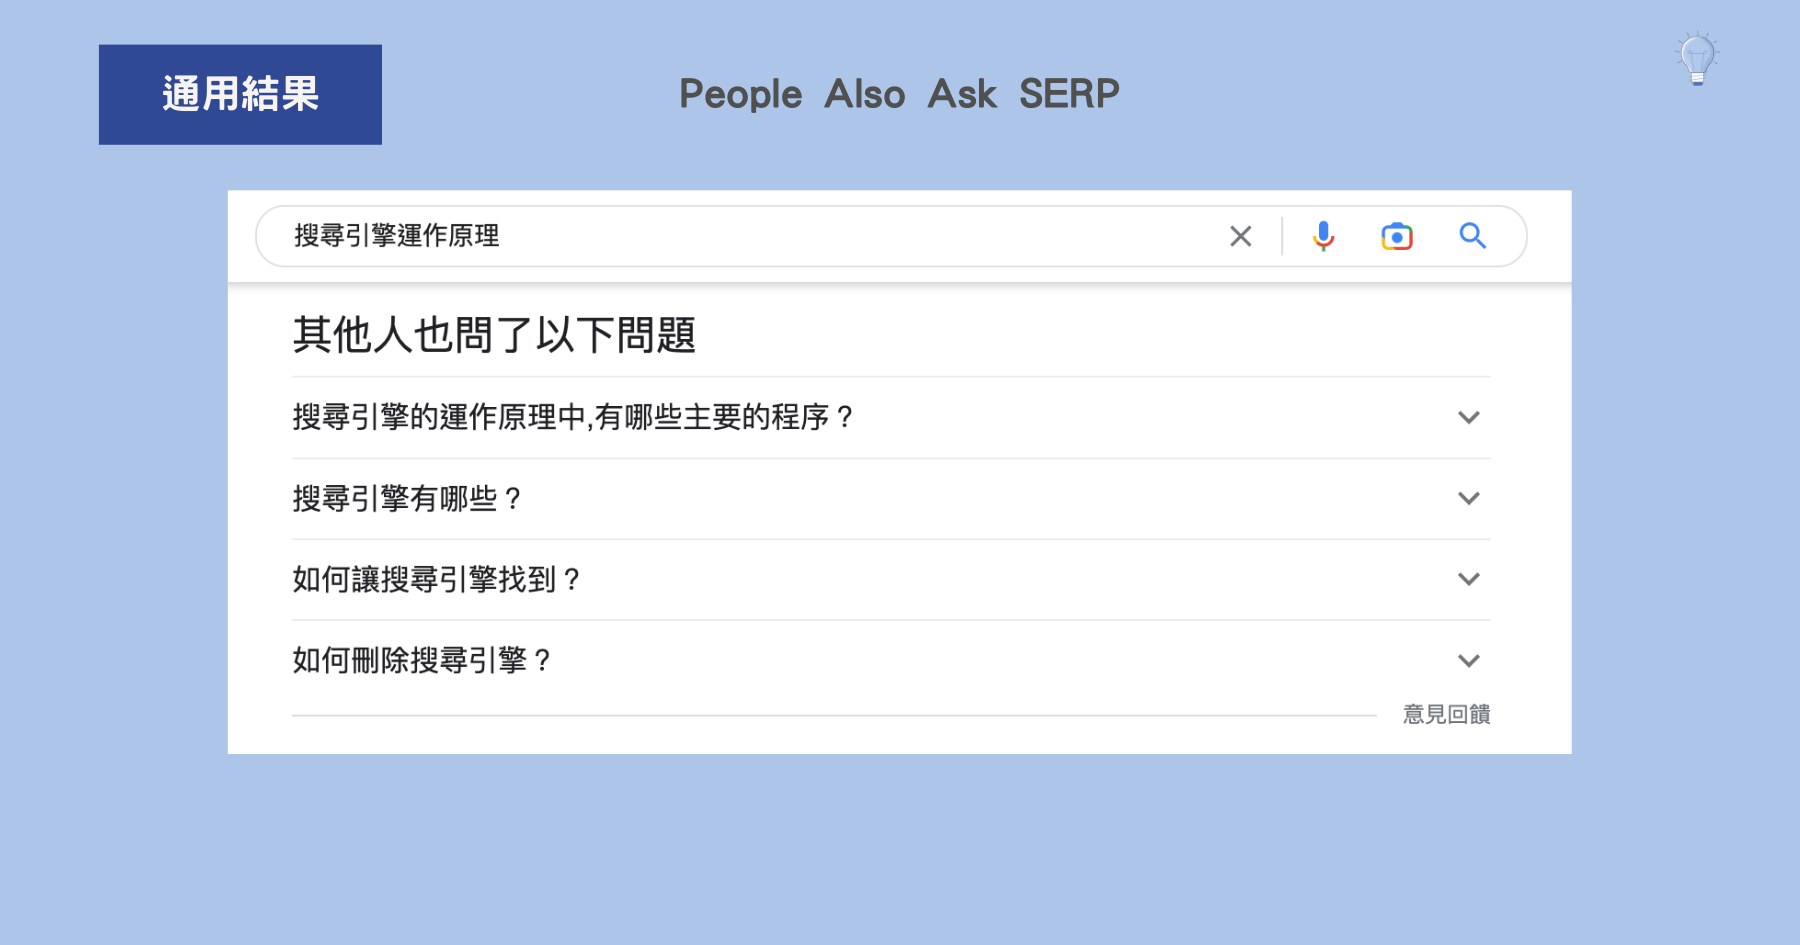 People Also Ask SERP